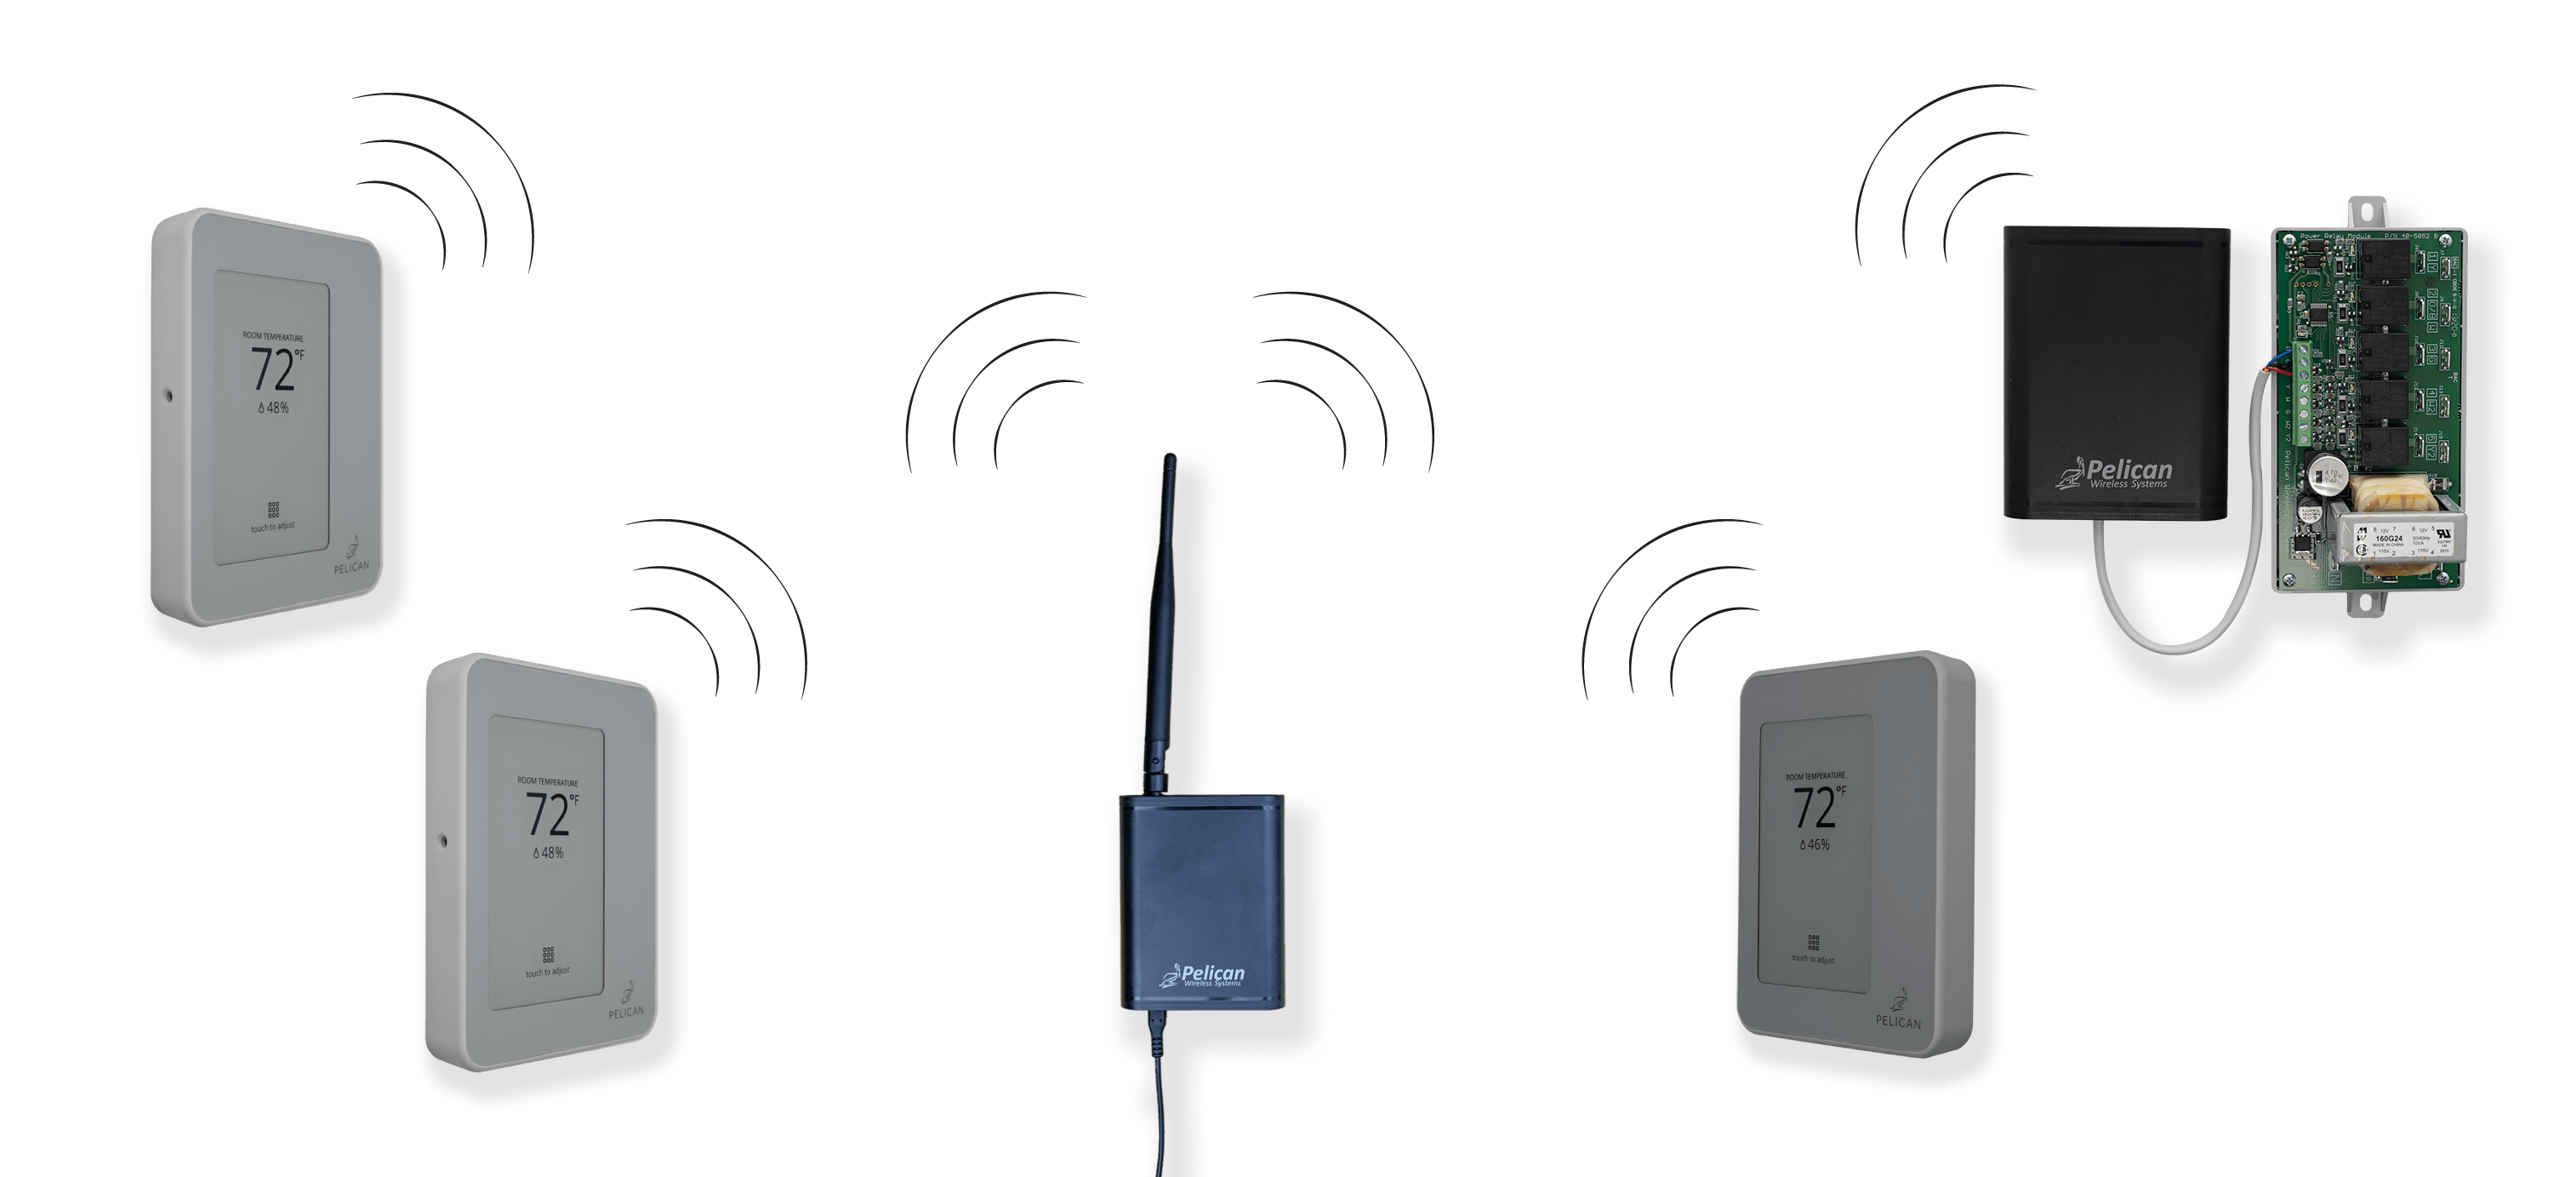 Wireless Repeater (WR400) - Pelican Wireless Systems